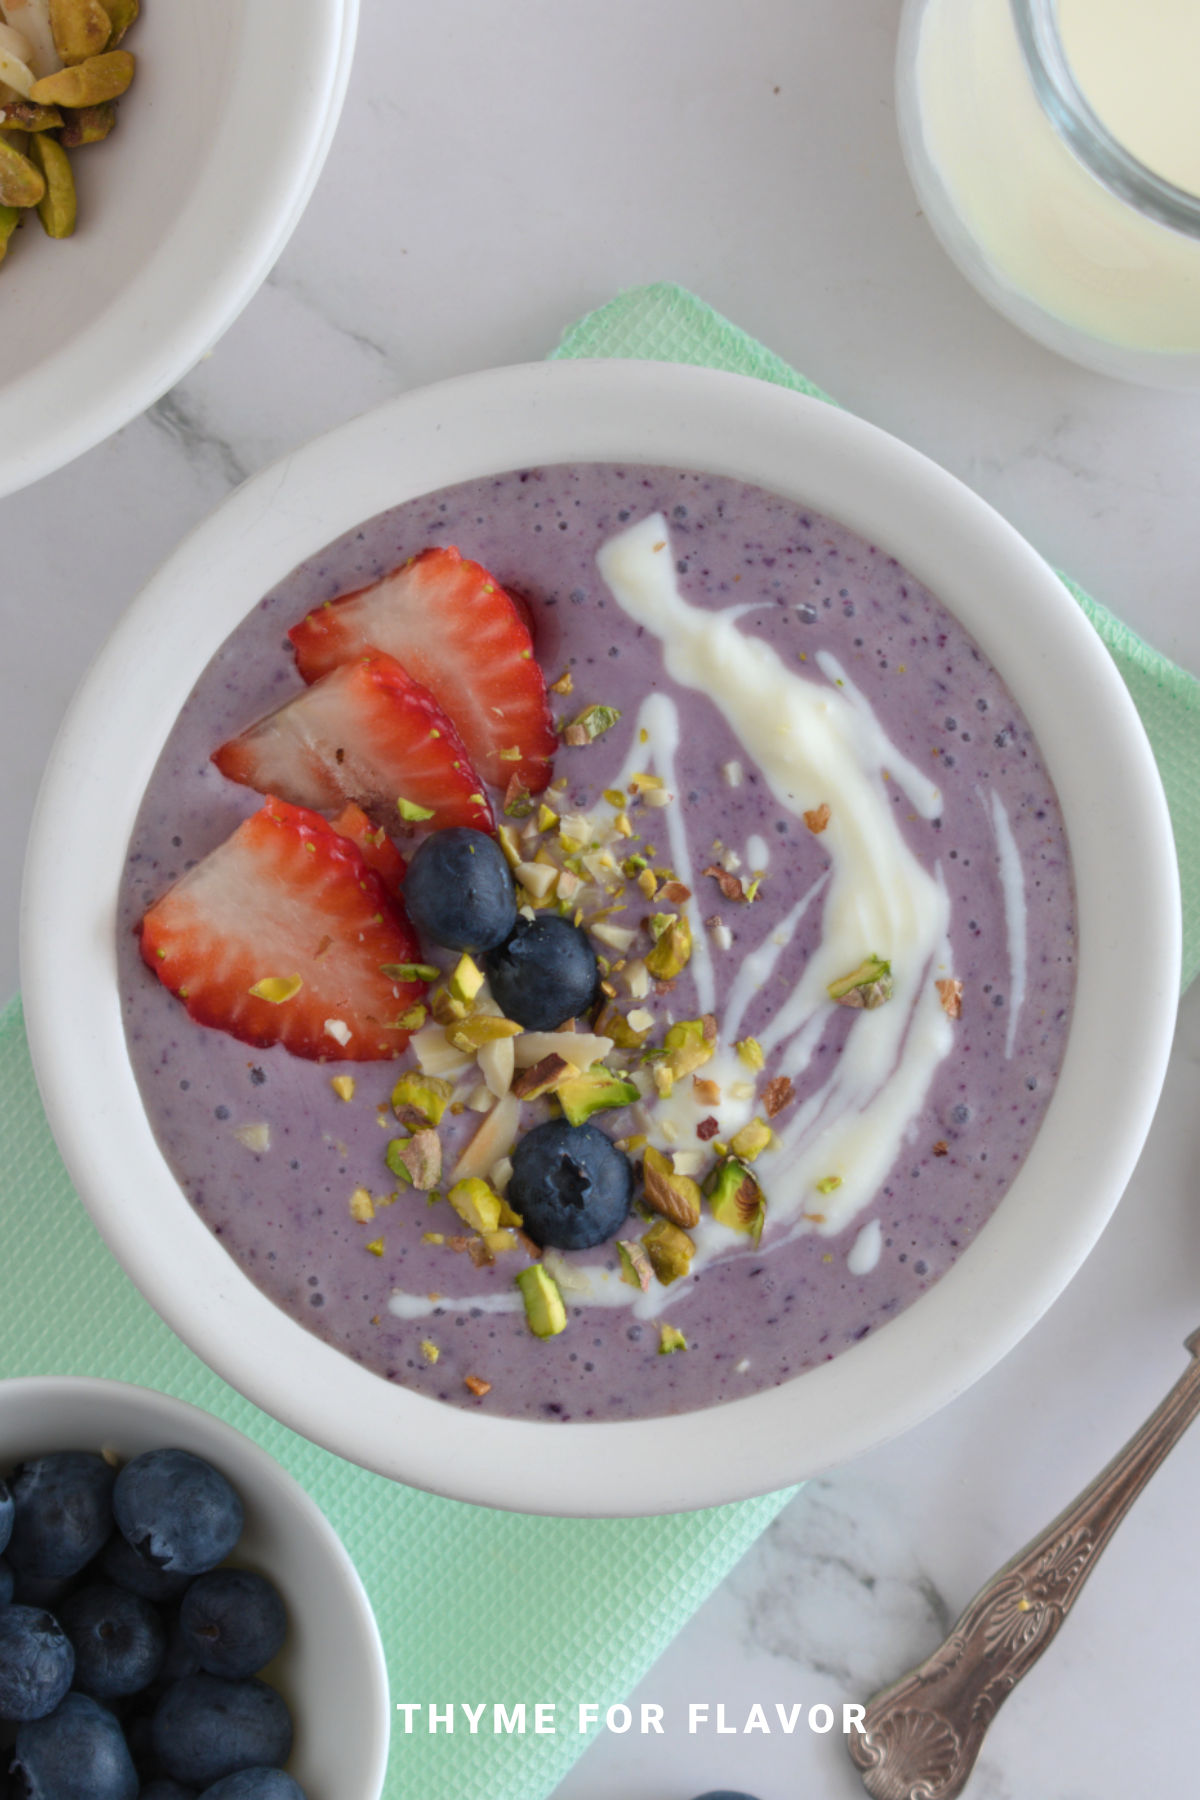 Top shot image of a purple smoothie bowl in a white bowl, topped with strawberries, blueberries, pistachios, and yogurt.